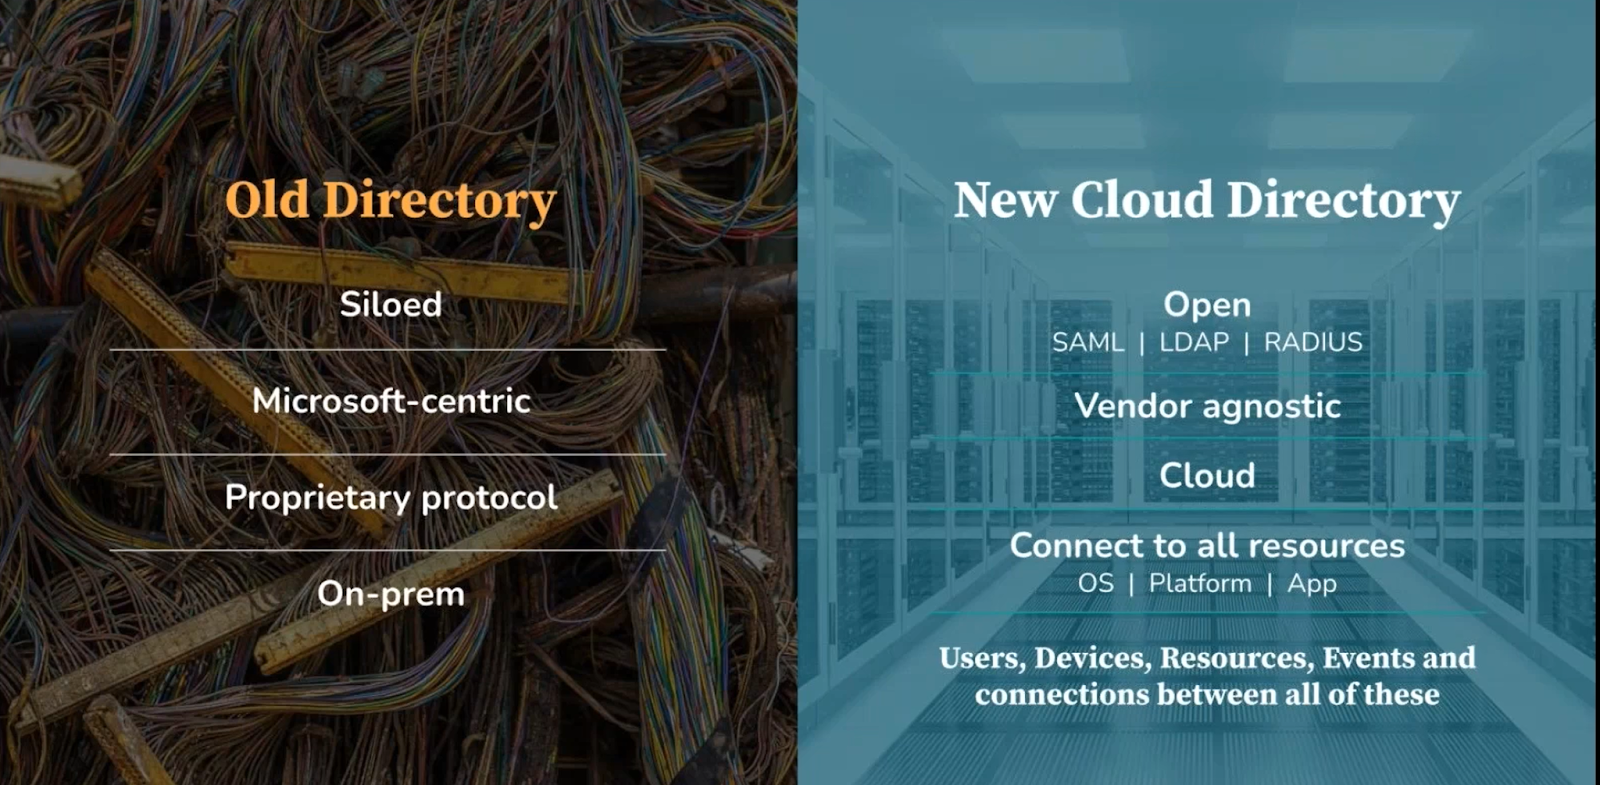 The old on-prem directory is siloed, Microsoft-centric, and leverages a proprietary protocol. This is in direct contrast to the new cloud directory that is open protocol, vendor-agnostic, and connects to all types of IT resources.